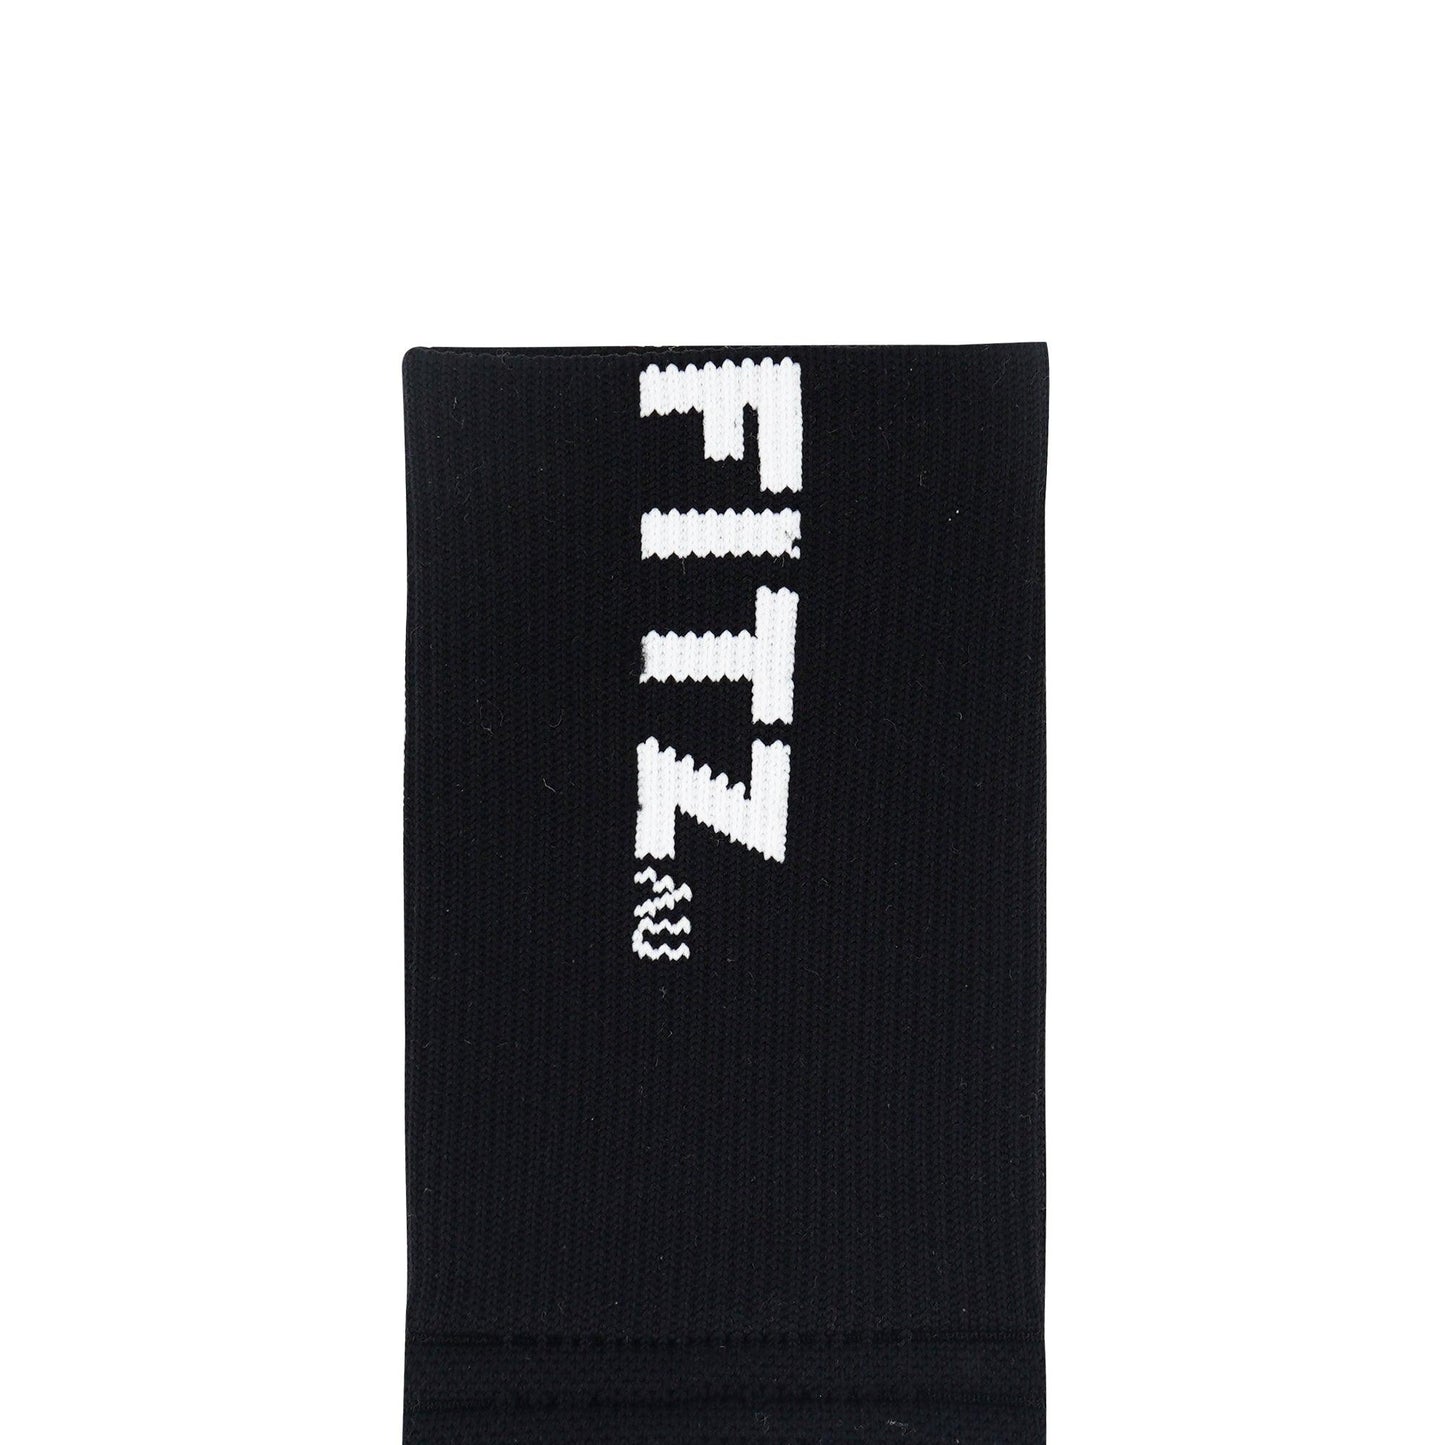 Workout Pack 3 Grip Socks and 1 Free Active Shirt - Gift Box - FITZ AUSTRALIA